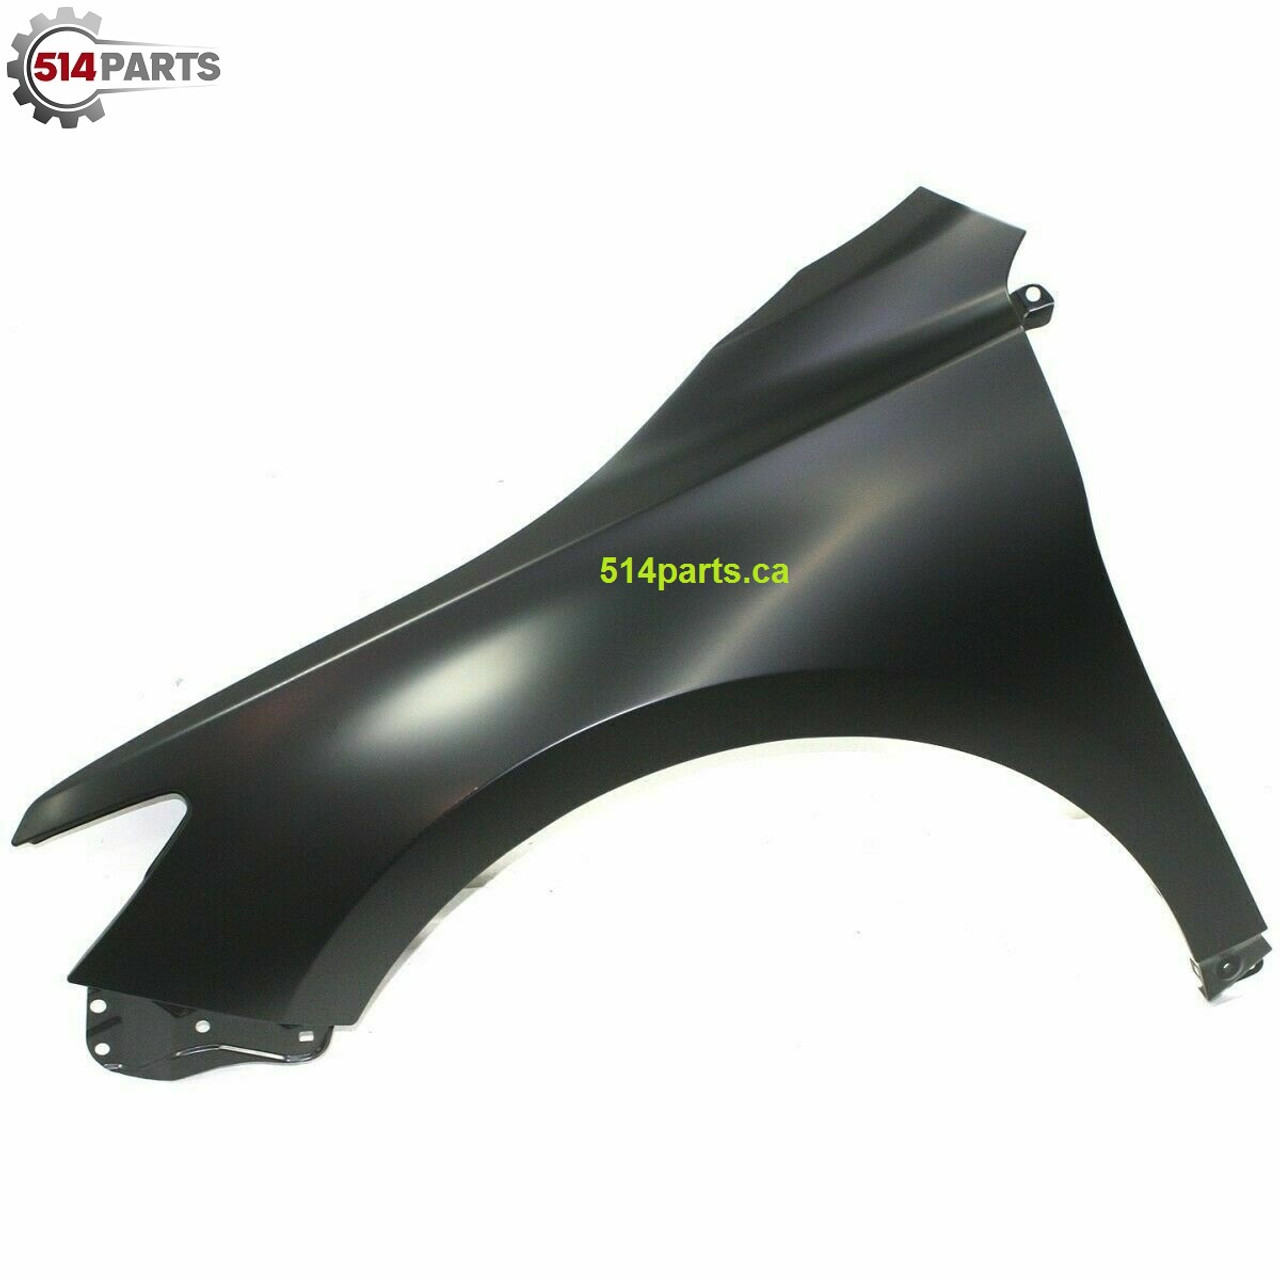 2015 - 2017 TOYOTA CAMRY and CAMRY HYBRID FENDERS - AILES